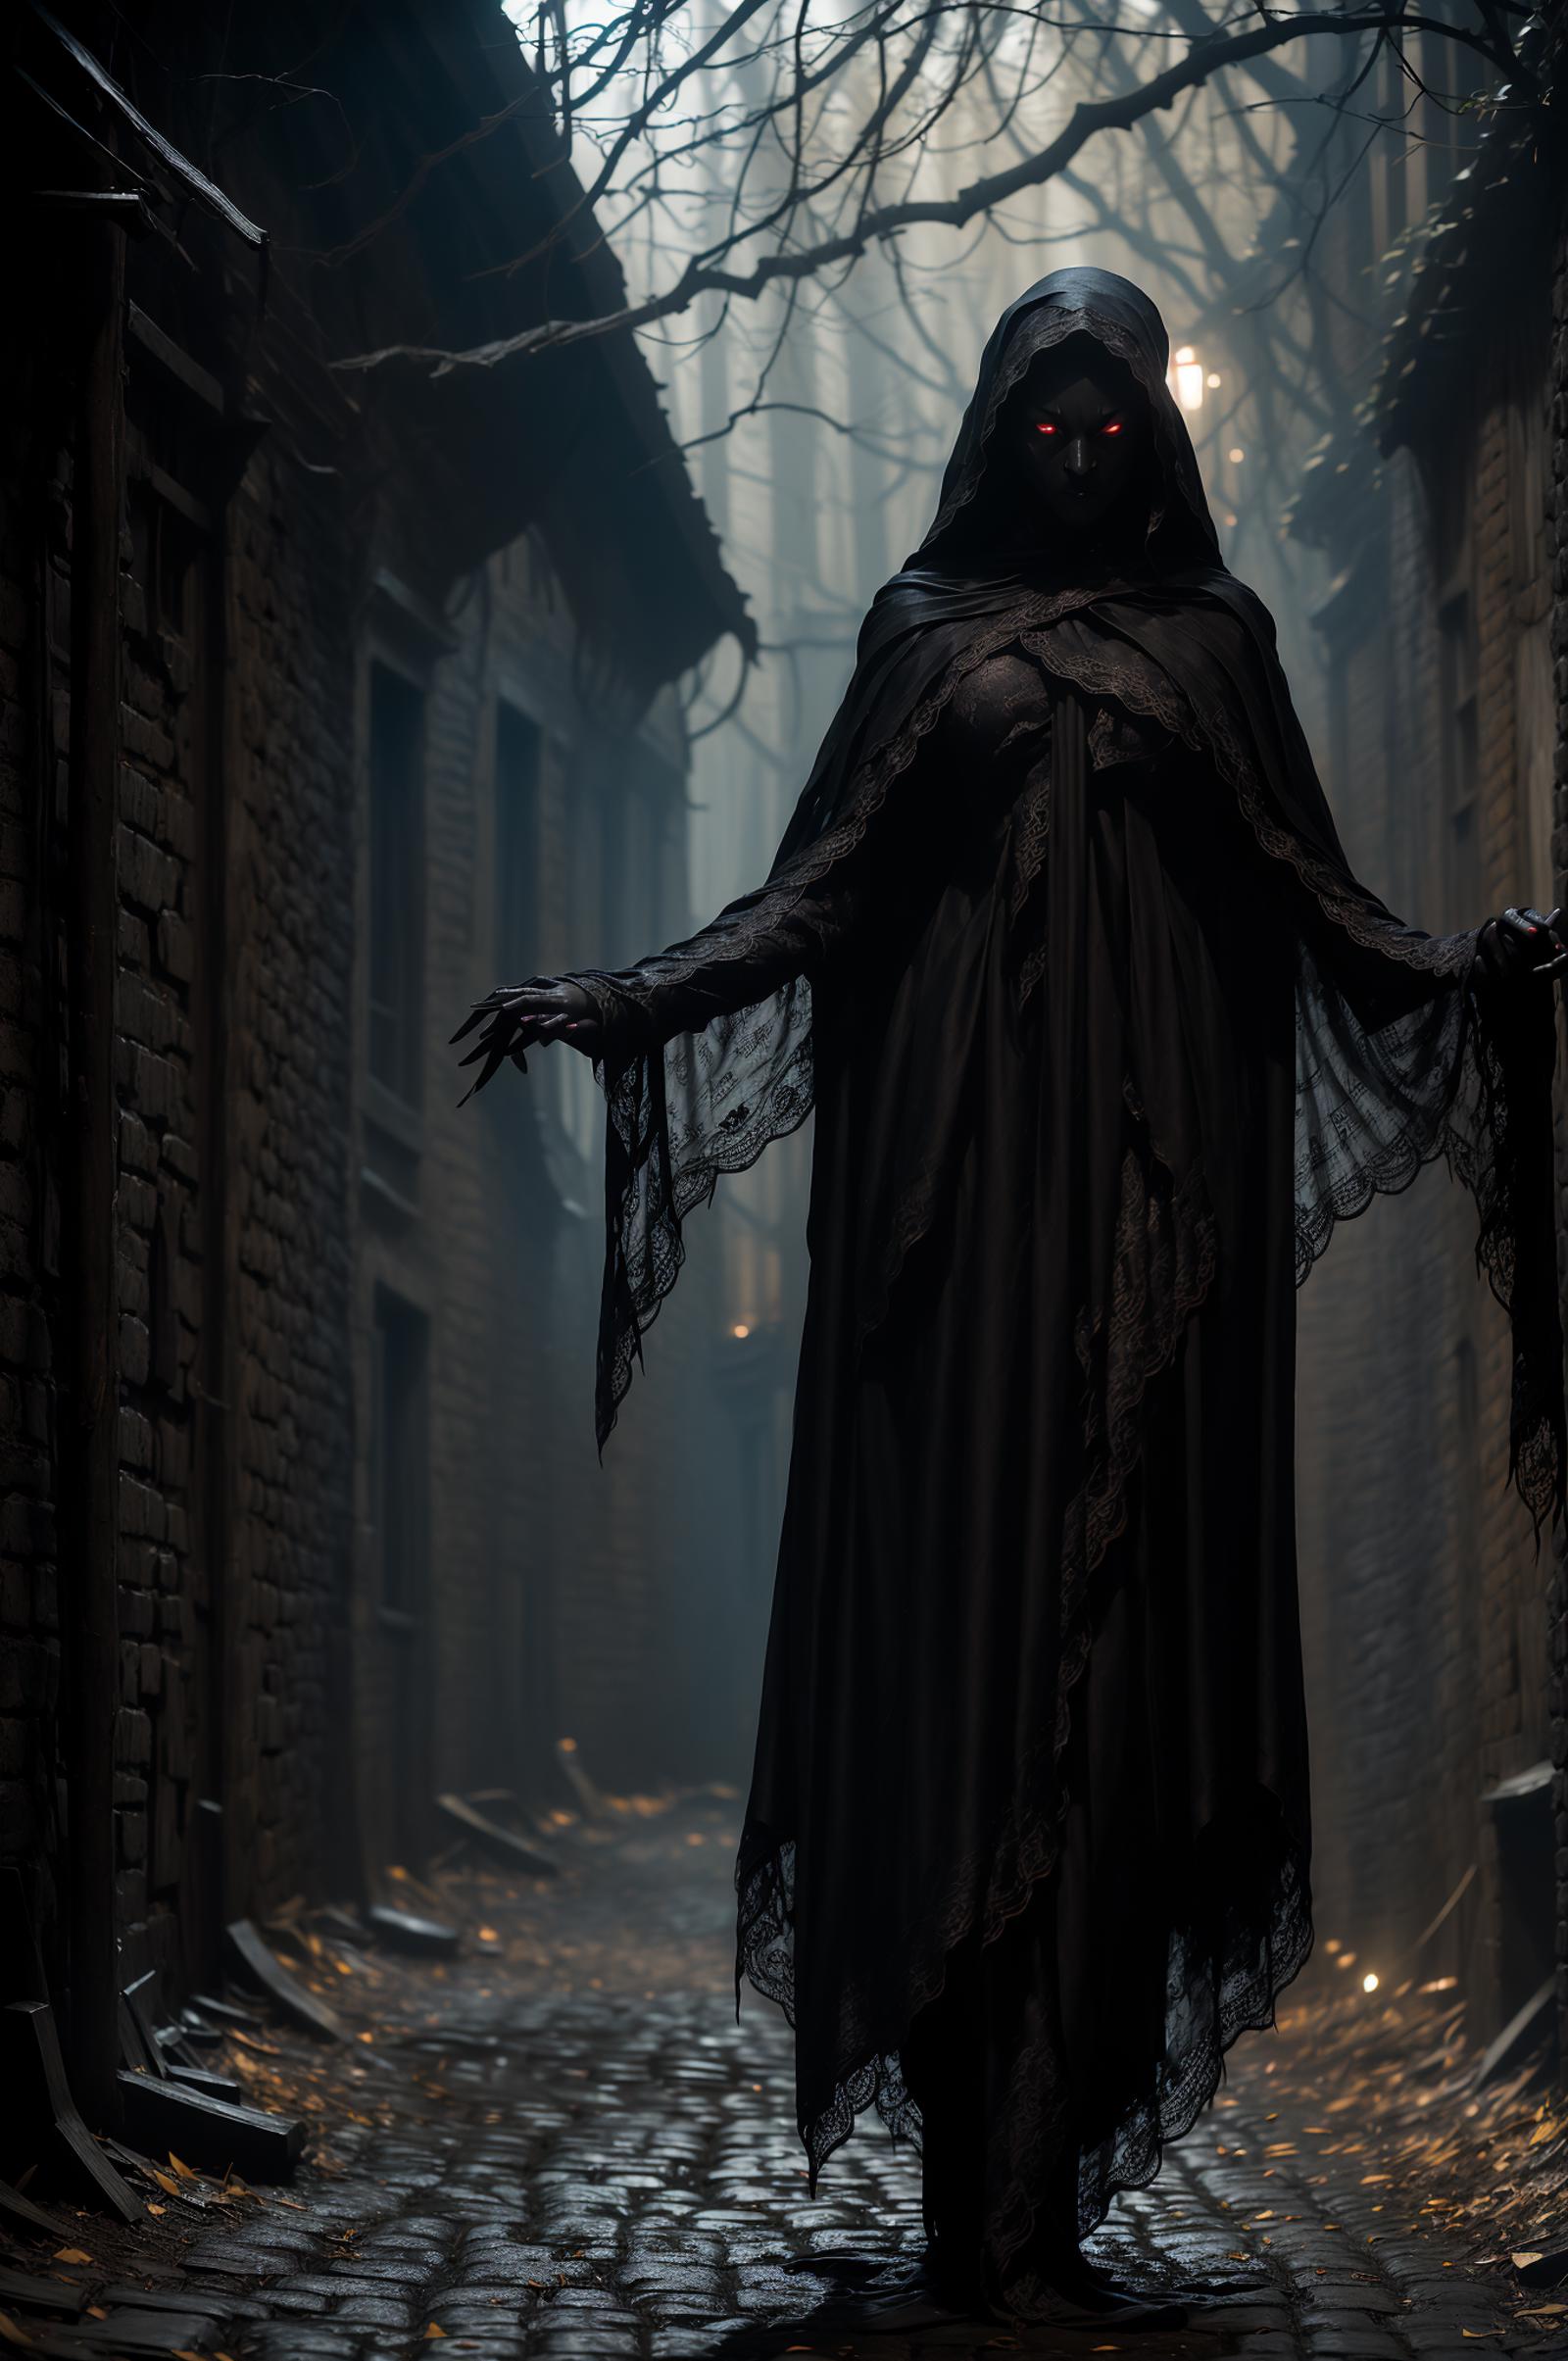 A dark and mysterious scene with a woman in a black dress in the middle of a dark alley.